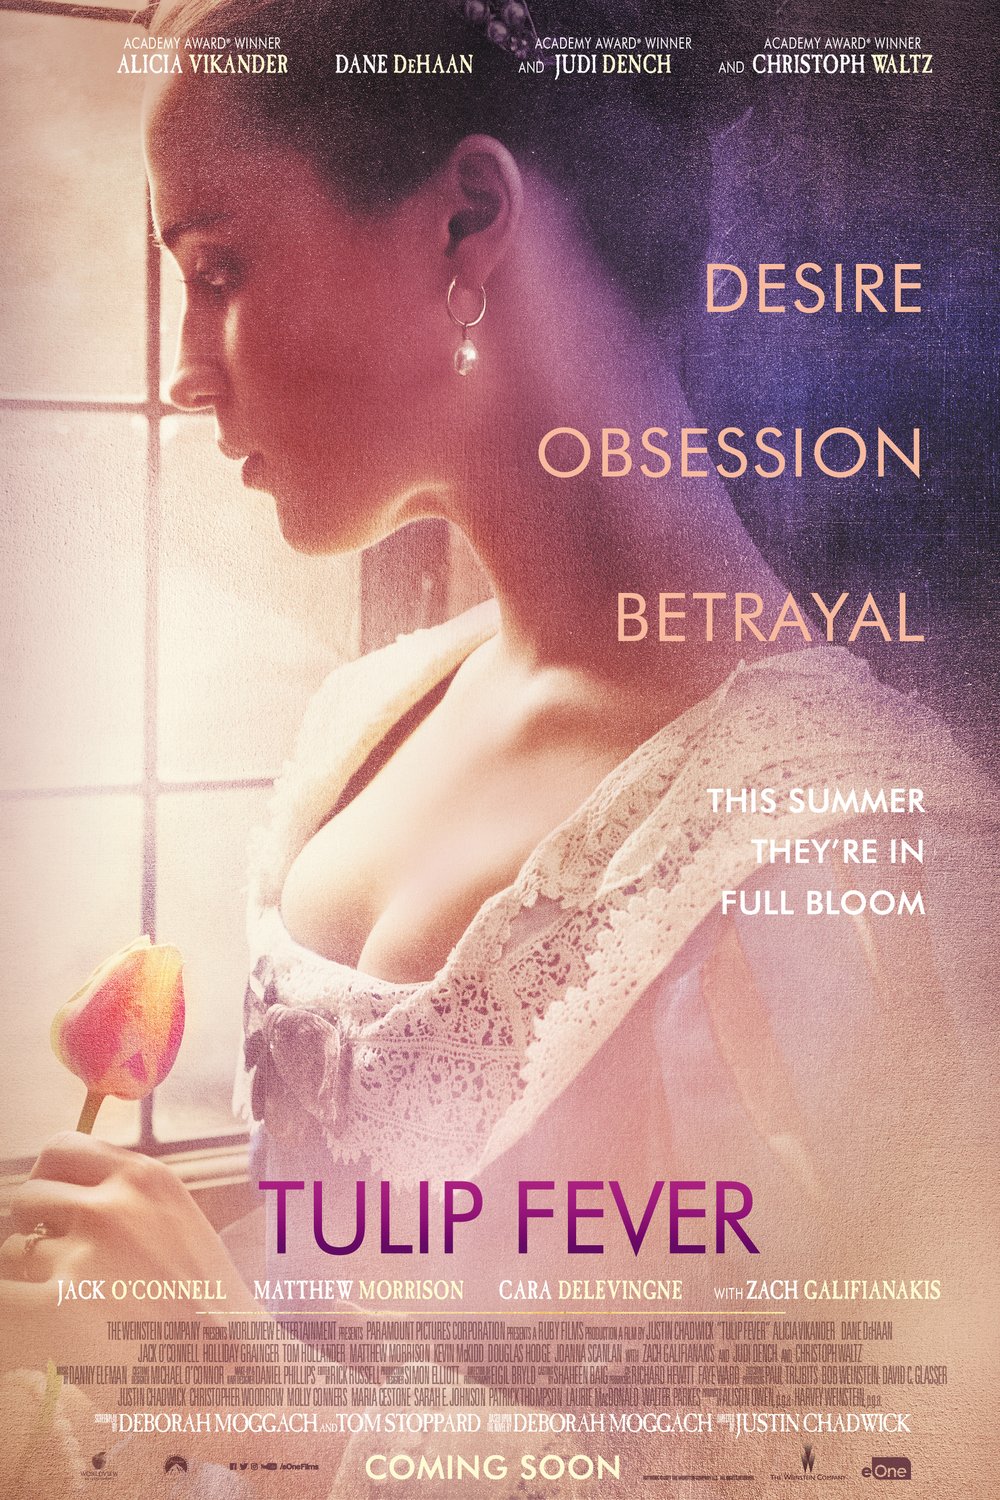 Poster of the movie Tulip Fever